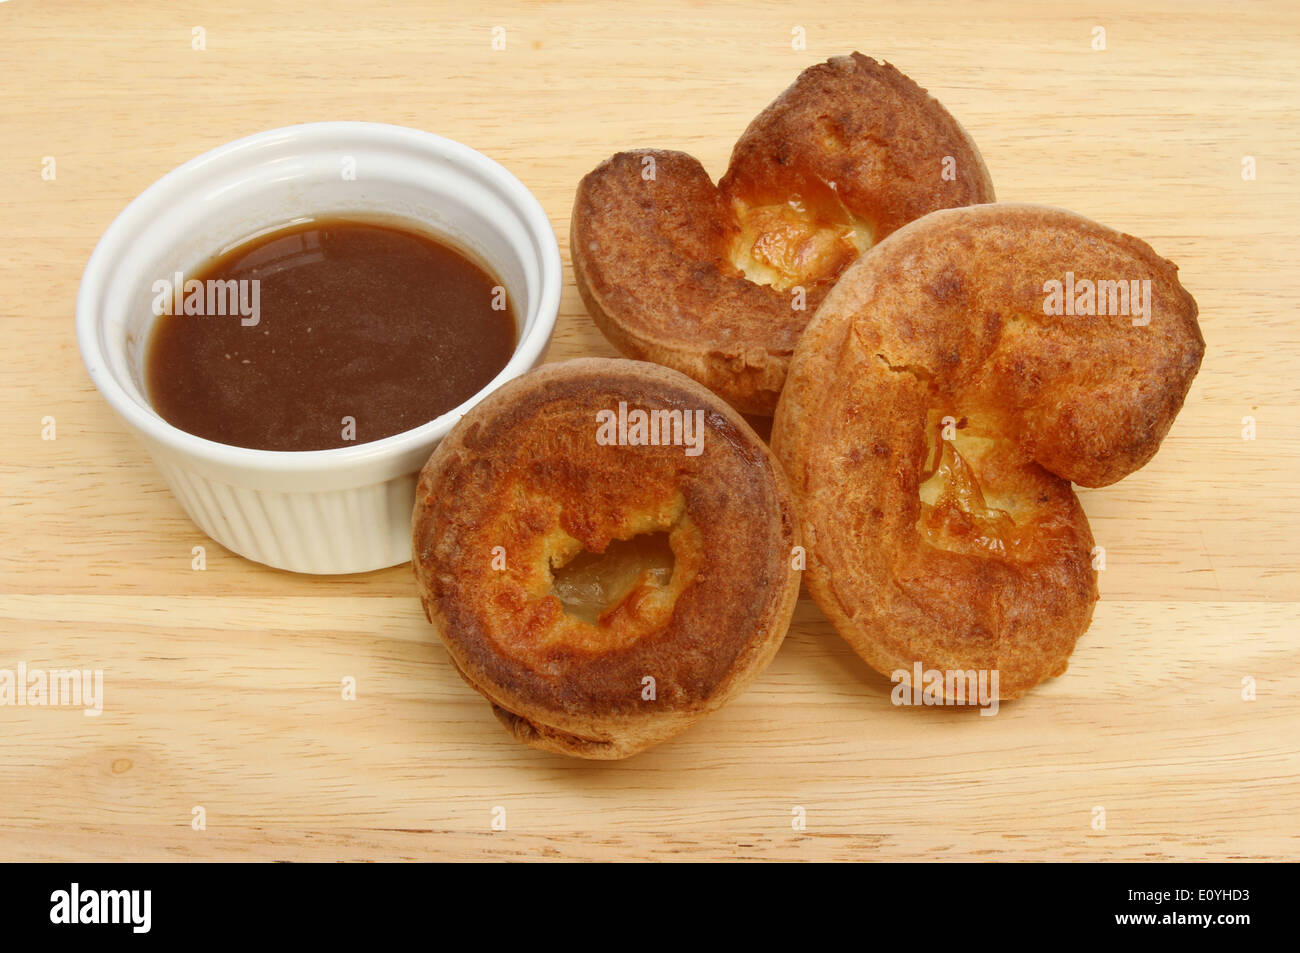 Yorkshire puddings with gravy in a ramekin on a wooden board Stock Photo